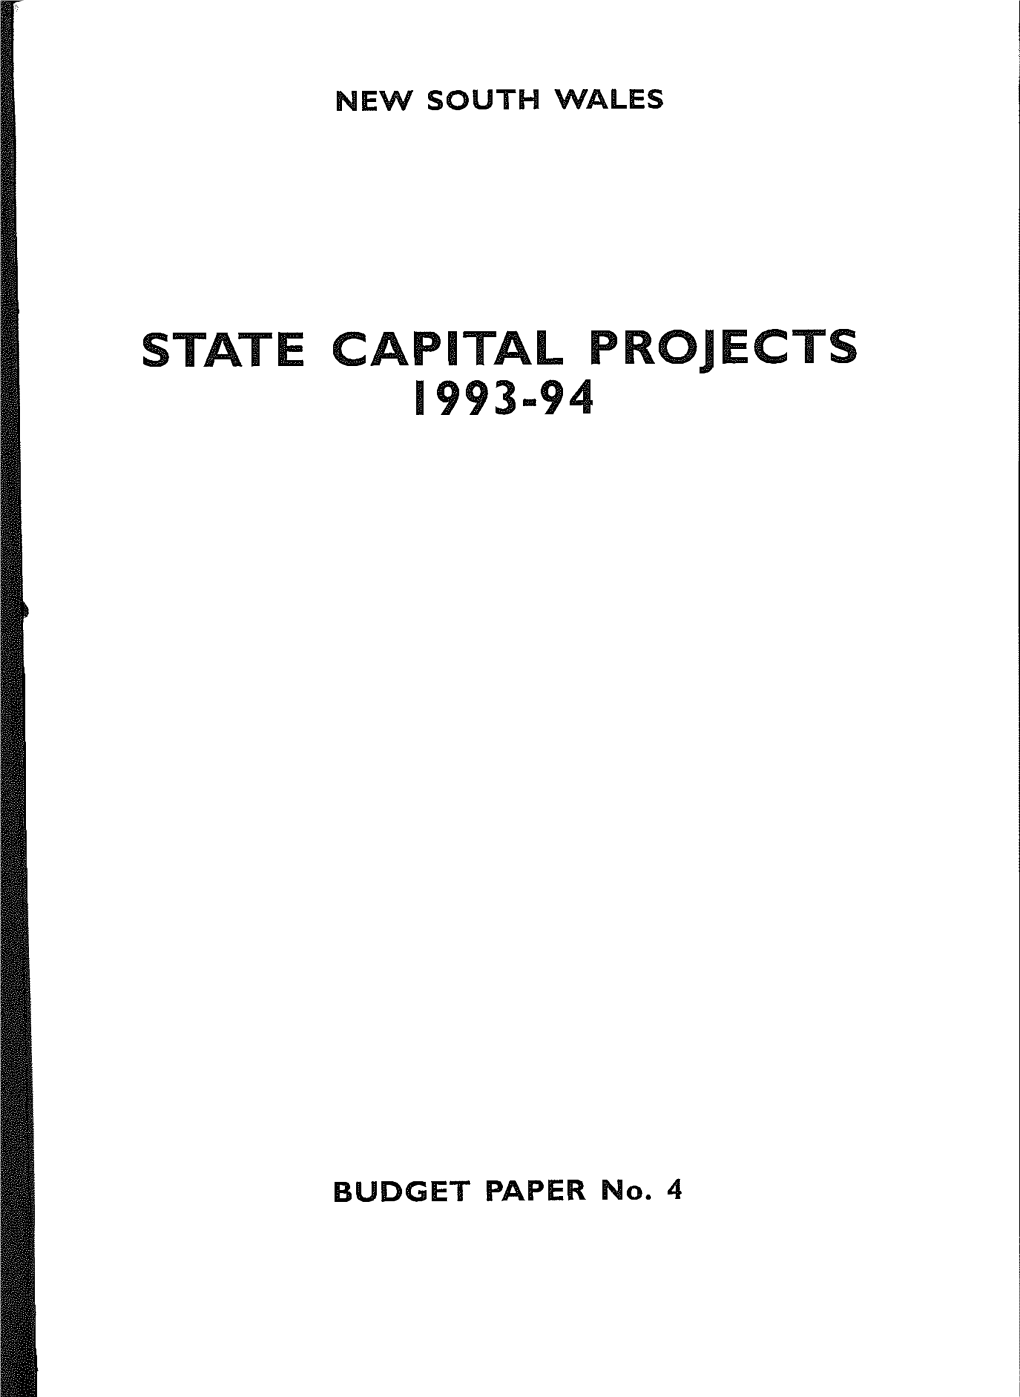 1993-94 State Capital Projects